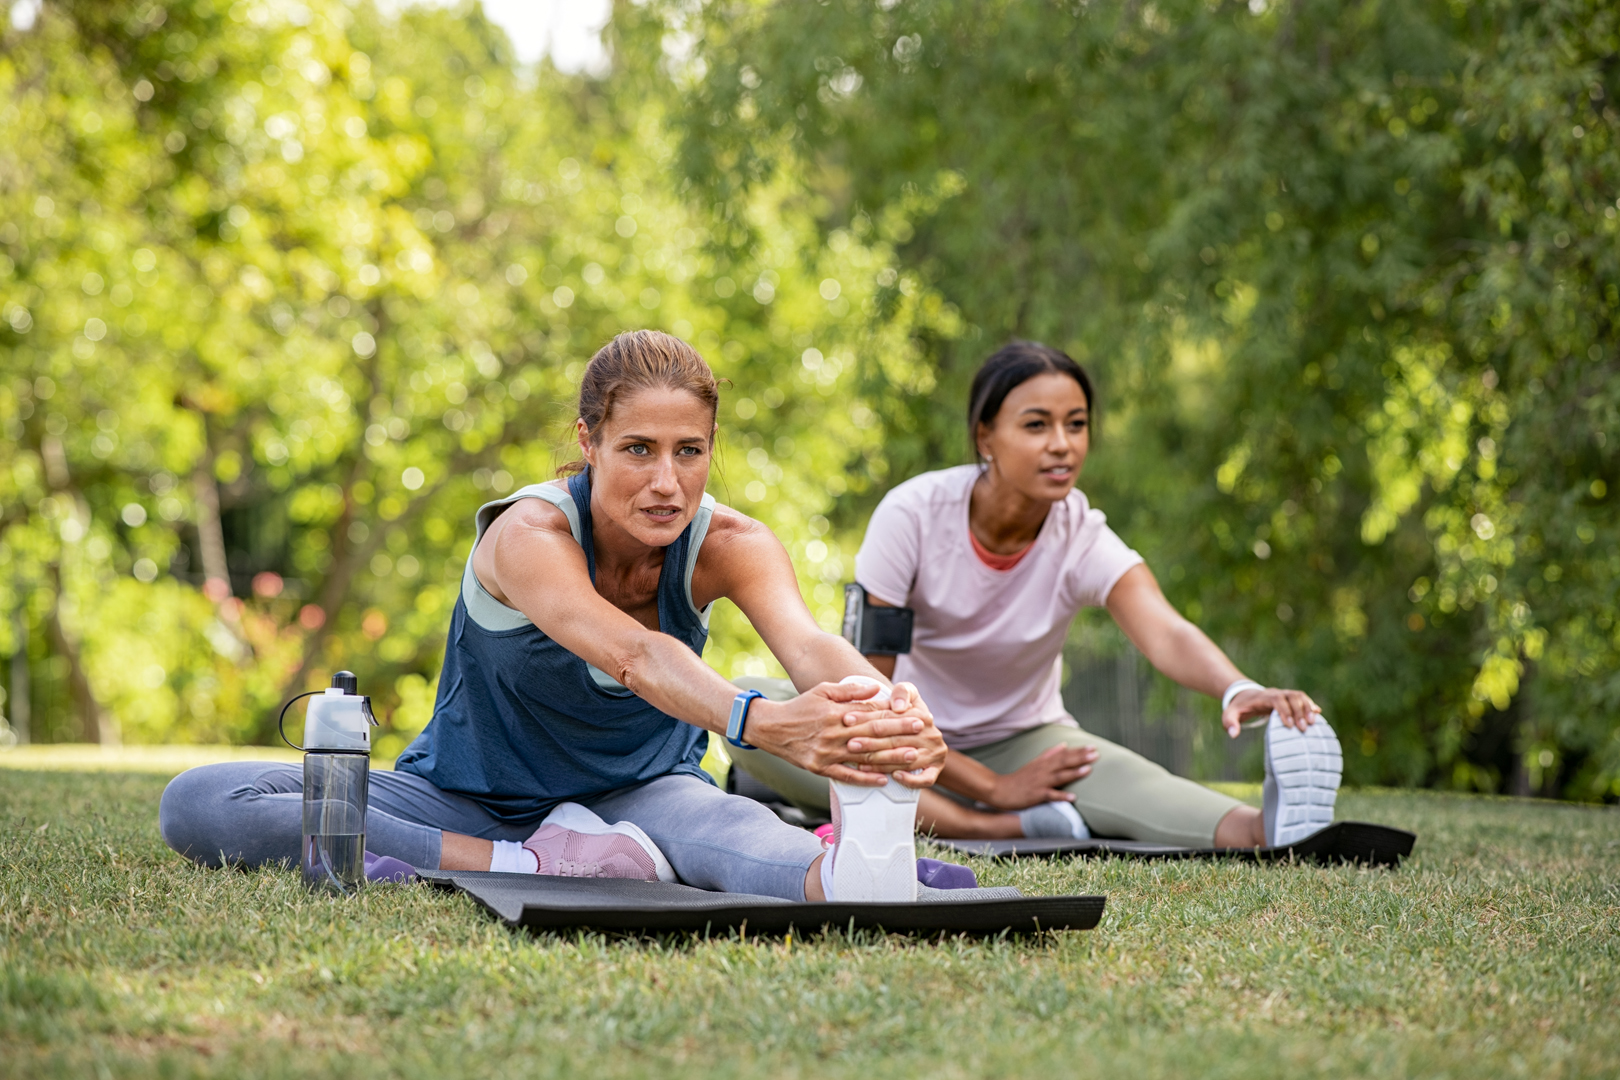 Two mature woman stretching their legs after exercise in park.